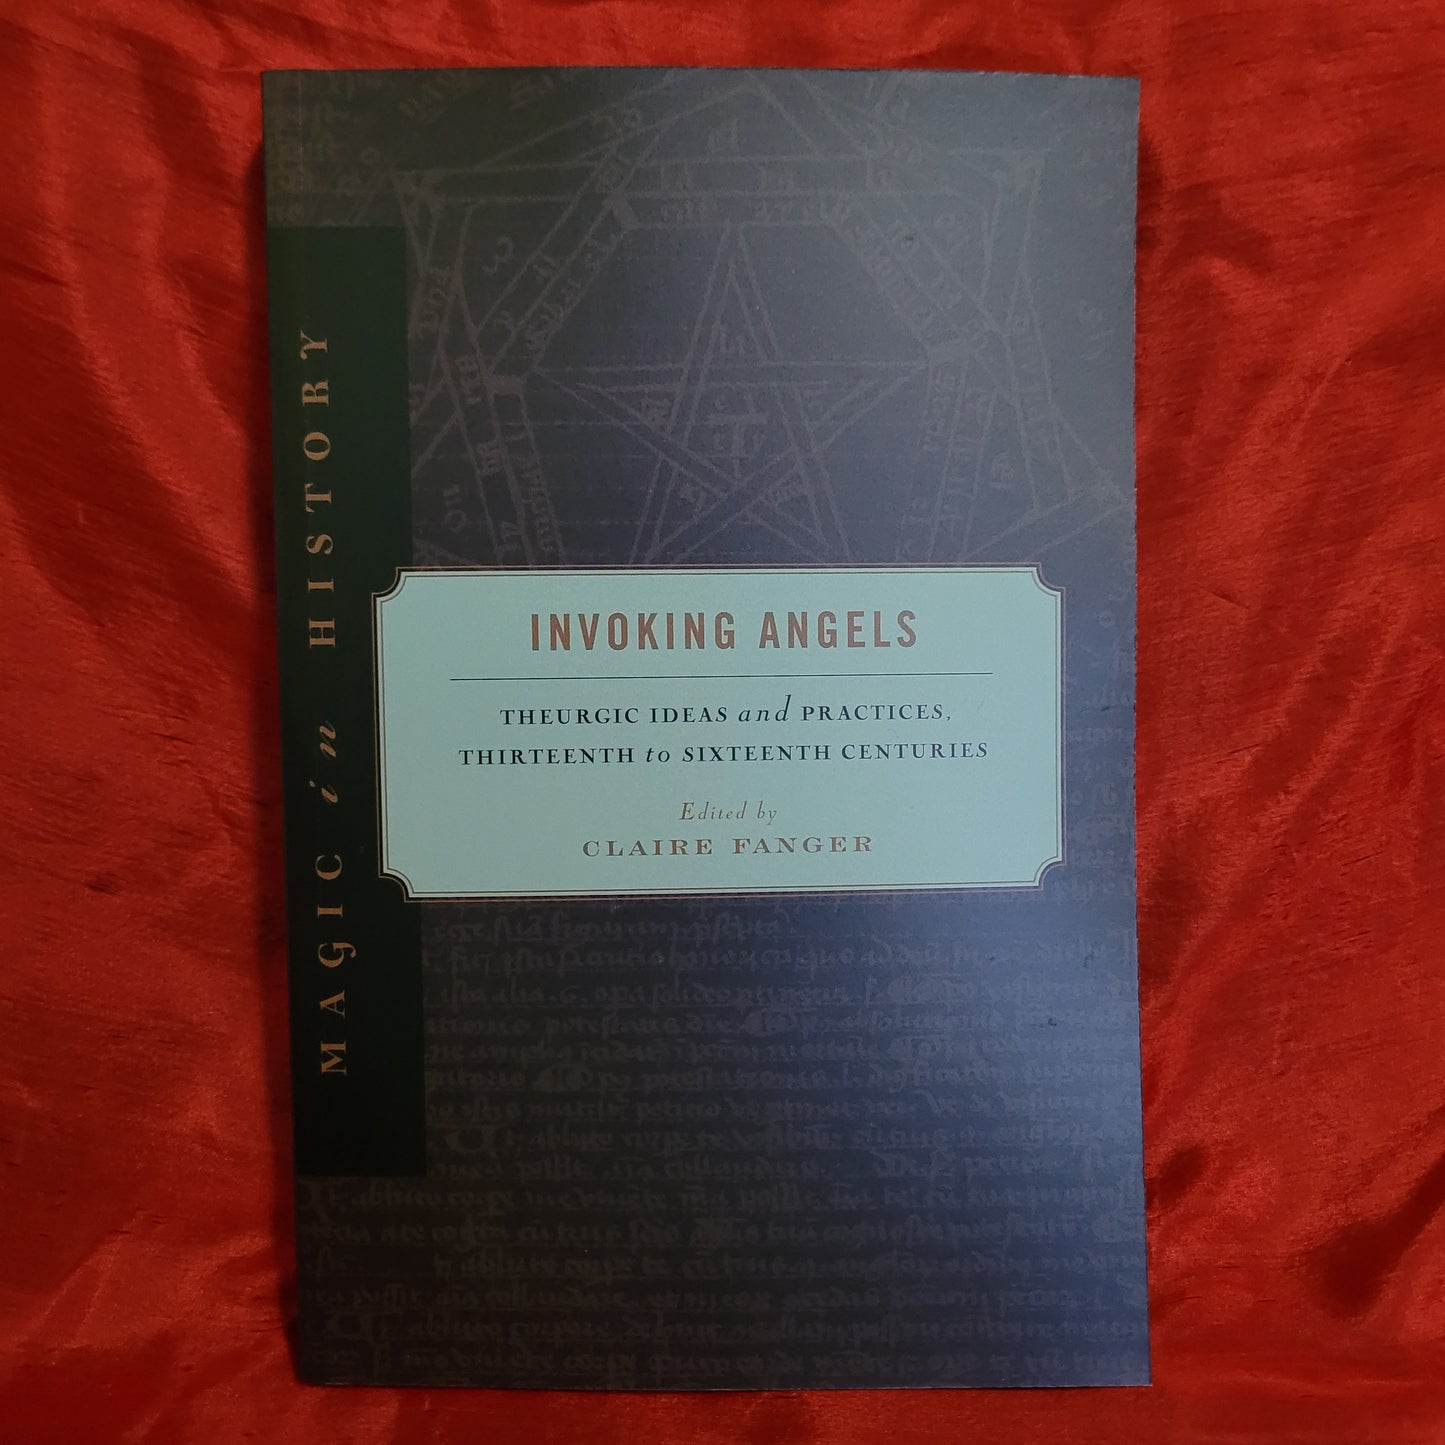 Invoking Angels: Theurgic Ideas and Practices, Thirteenth to Sixteenth Centuries edited by Clare Fanger (The Pennsylvania State University Press, 2012) Paperback